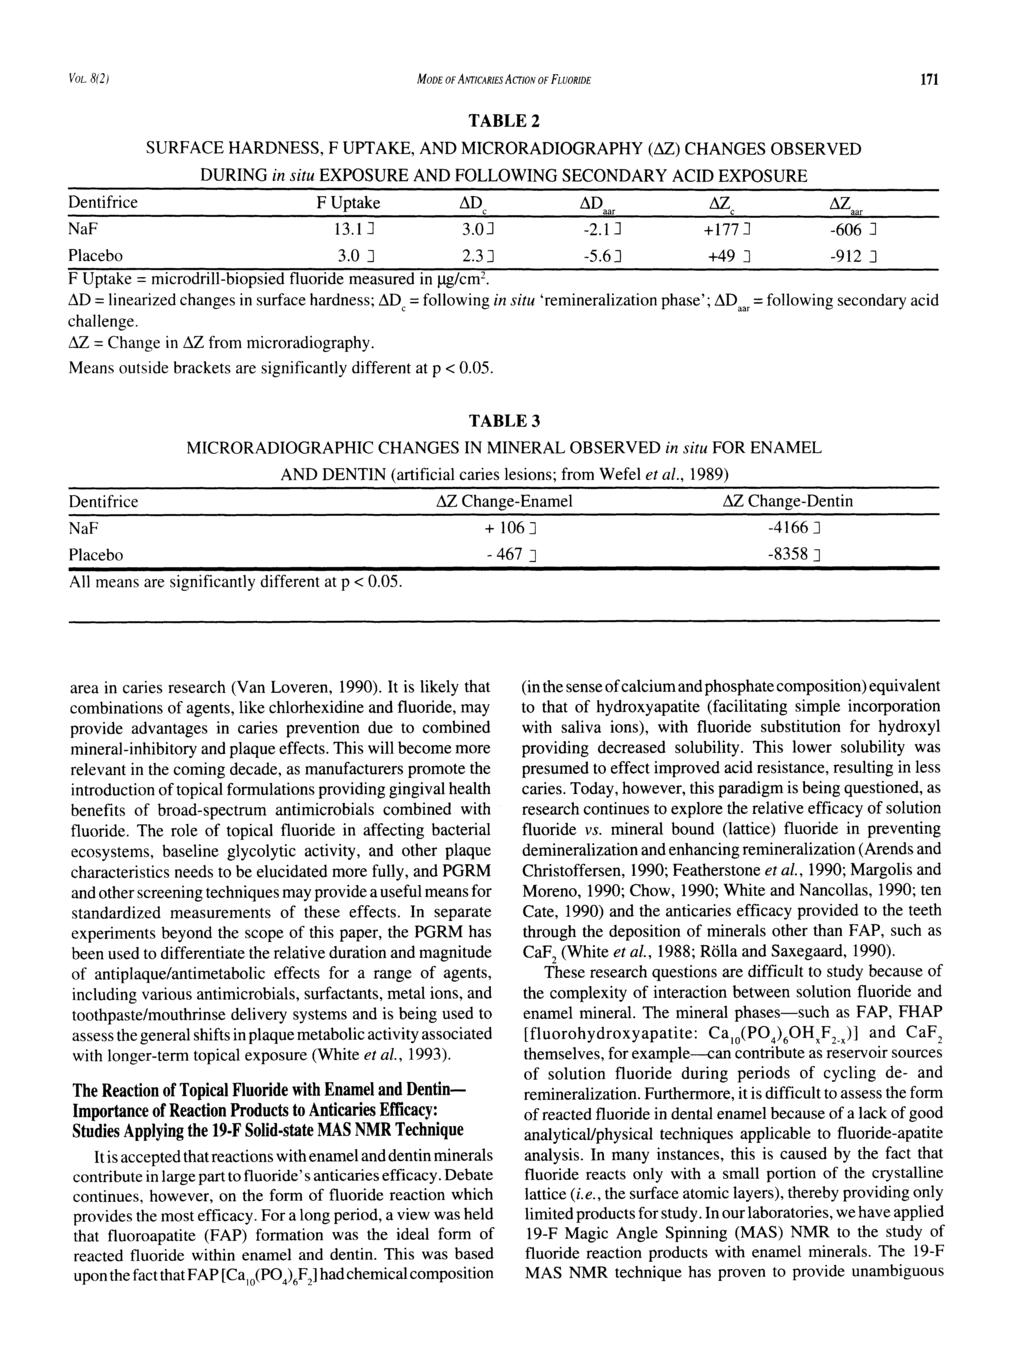 VOL. 8(2) MODE OF ANTICARIES ACTION OF FLUORIDE 171 Dentifrice NaF TABLE 2 SURFACE HARDNESS, F UPTAKE, AND MICRORADIOGRAPHY (AZ) CHANGES OBSERVED DURING in situ EXPOSURE AND FOLLOWING SECONDARY ACID